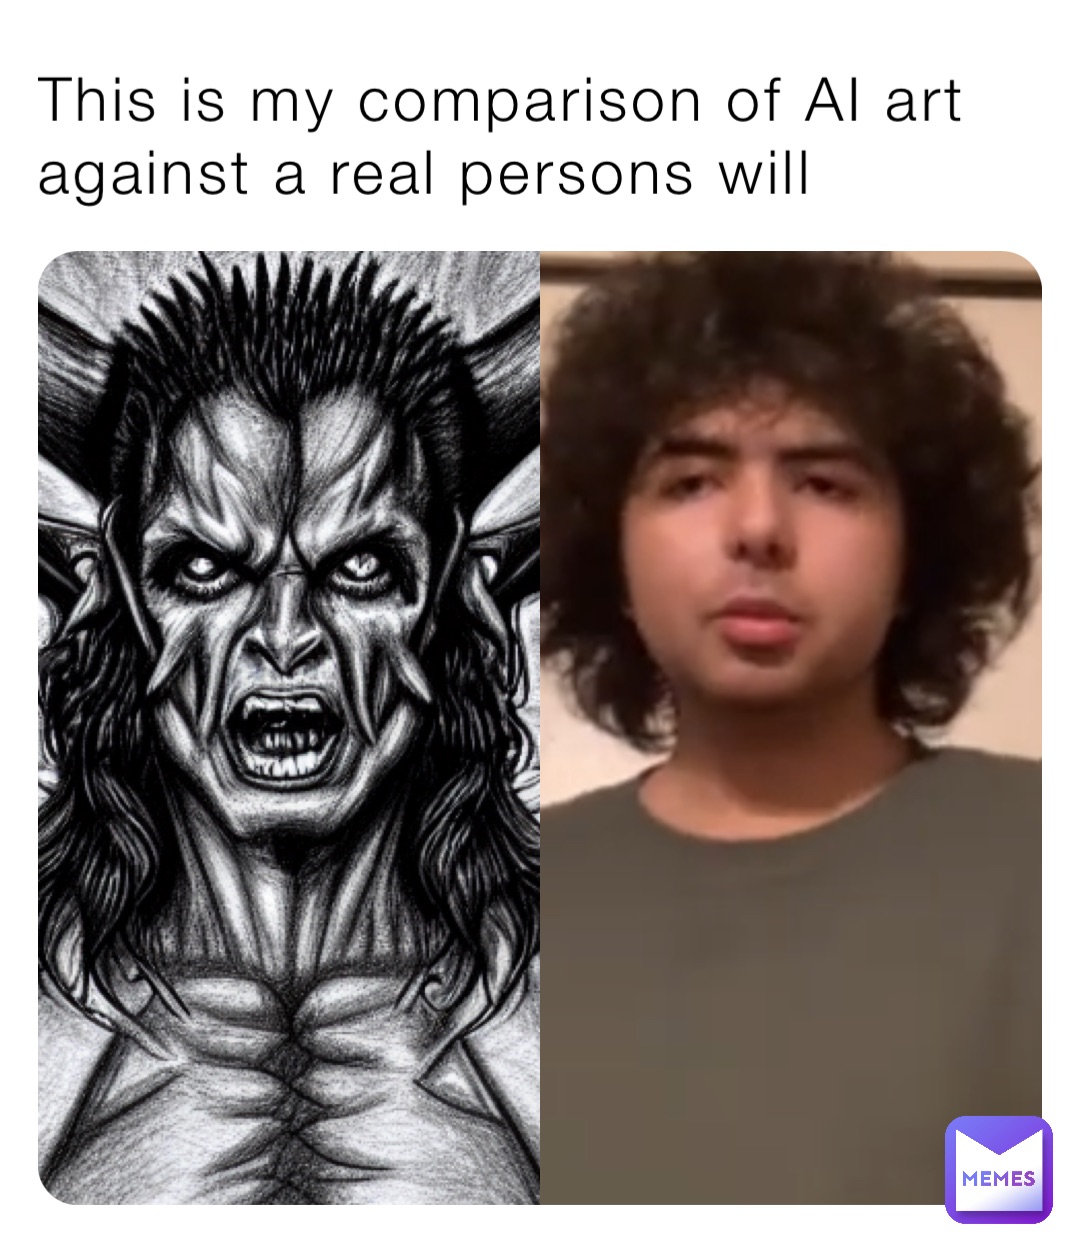 This is my comparison of AI art against a real persons will